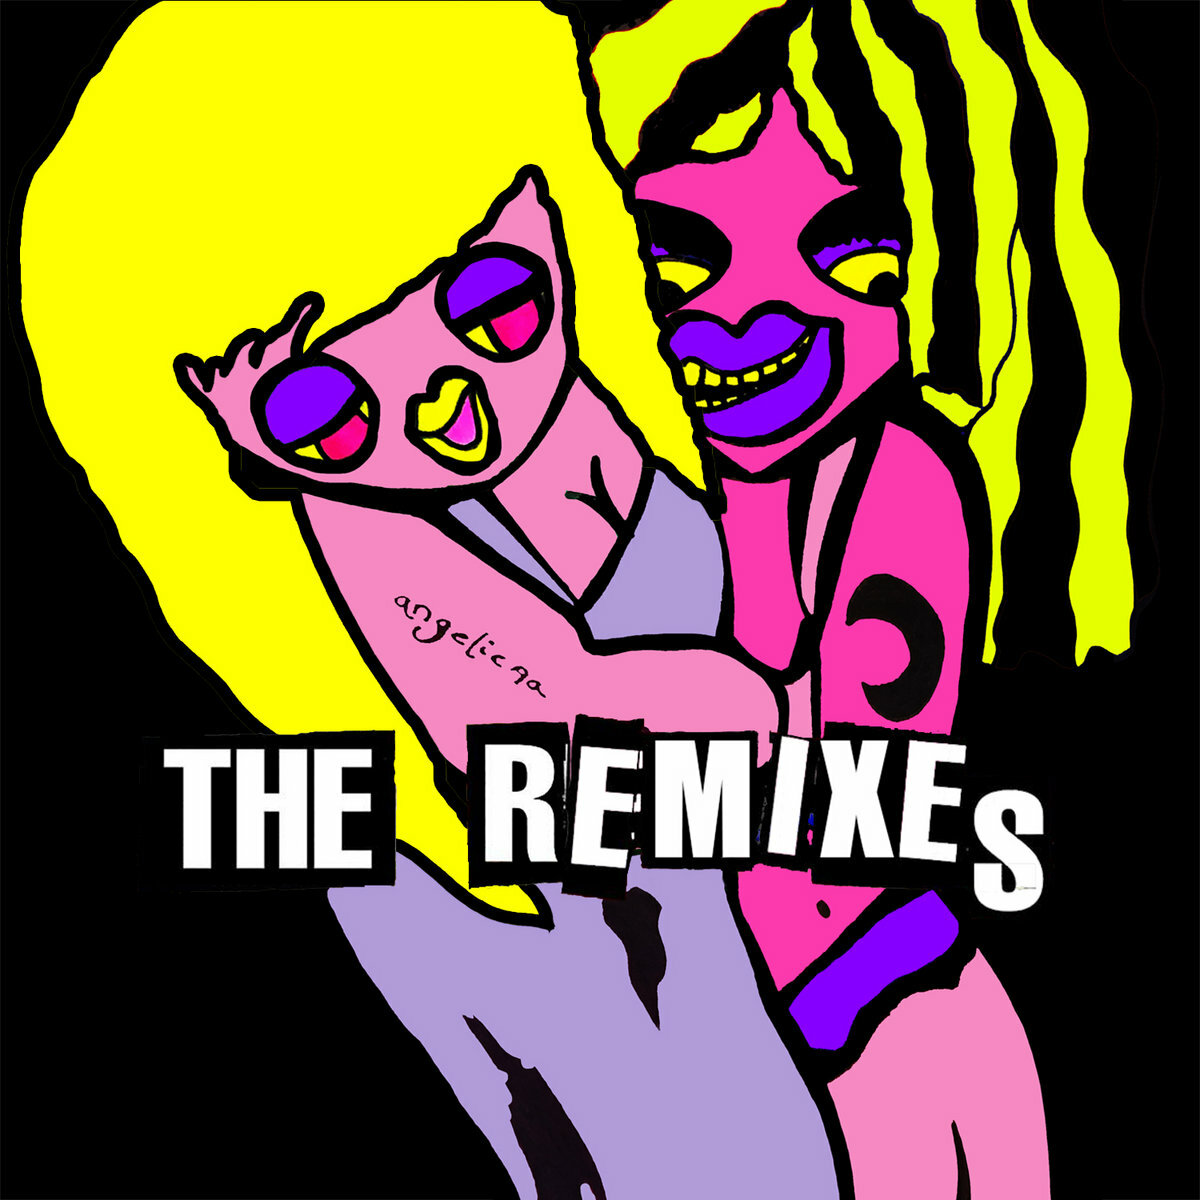 Two brightly coloured figures with pink skin and blonde hair embrace each other. The words 'the remixes'.